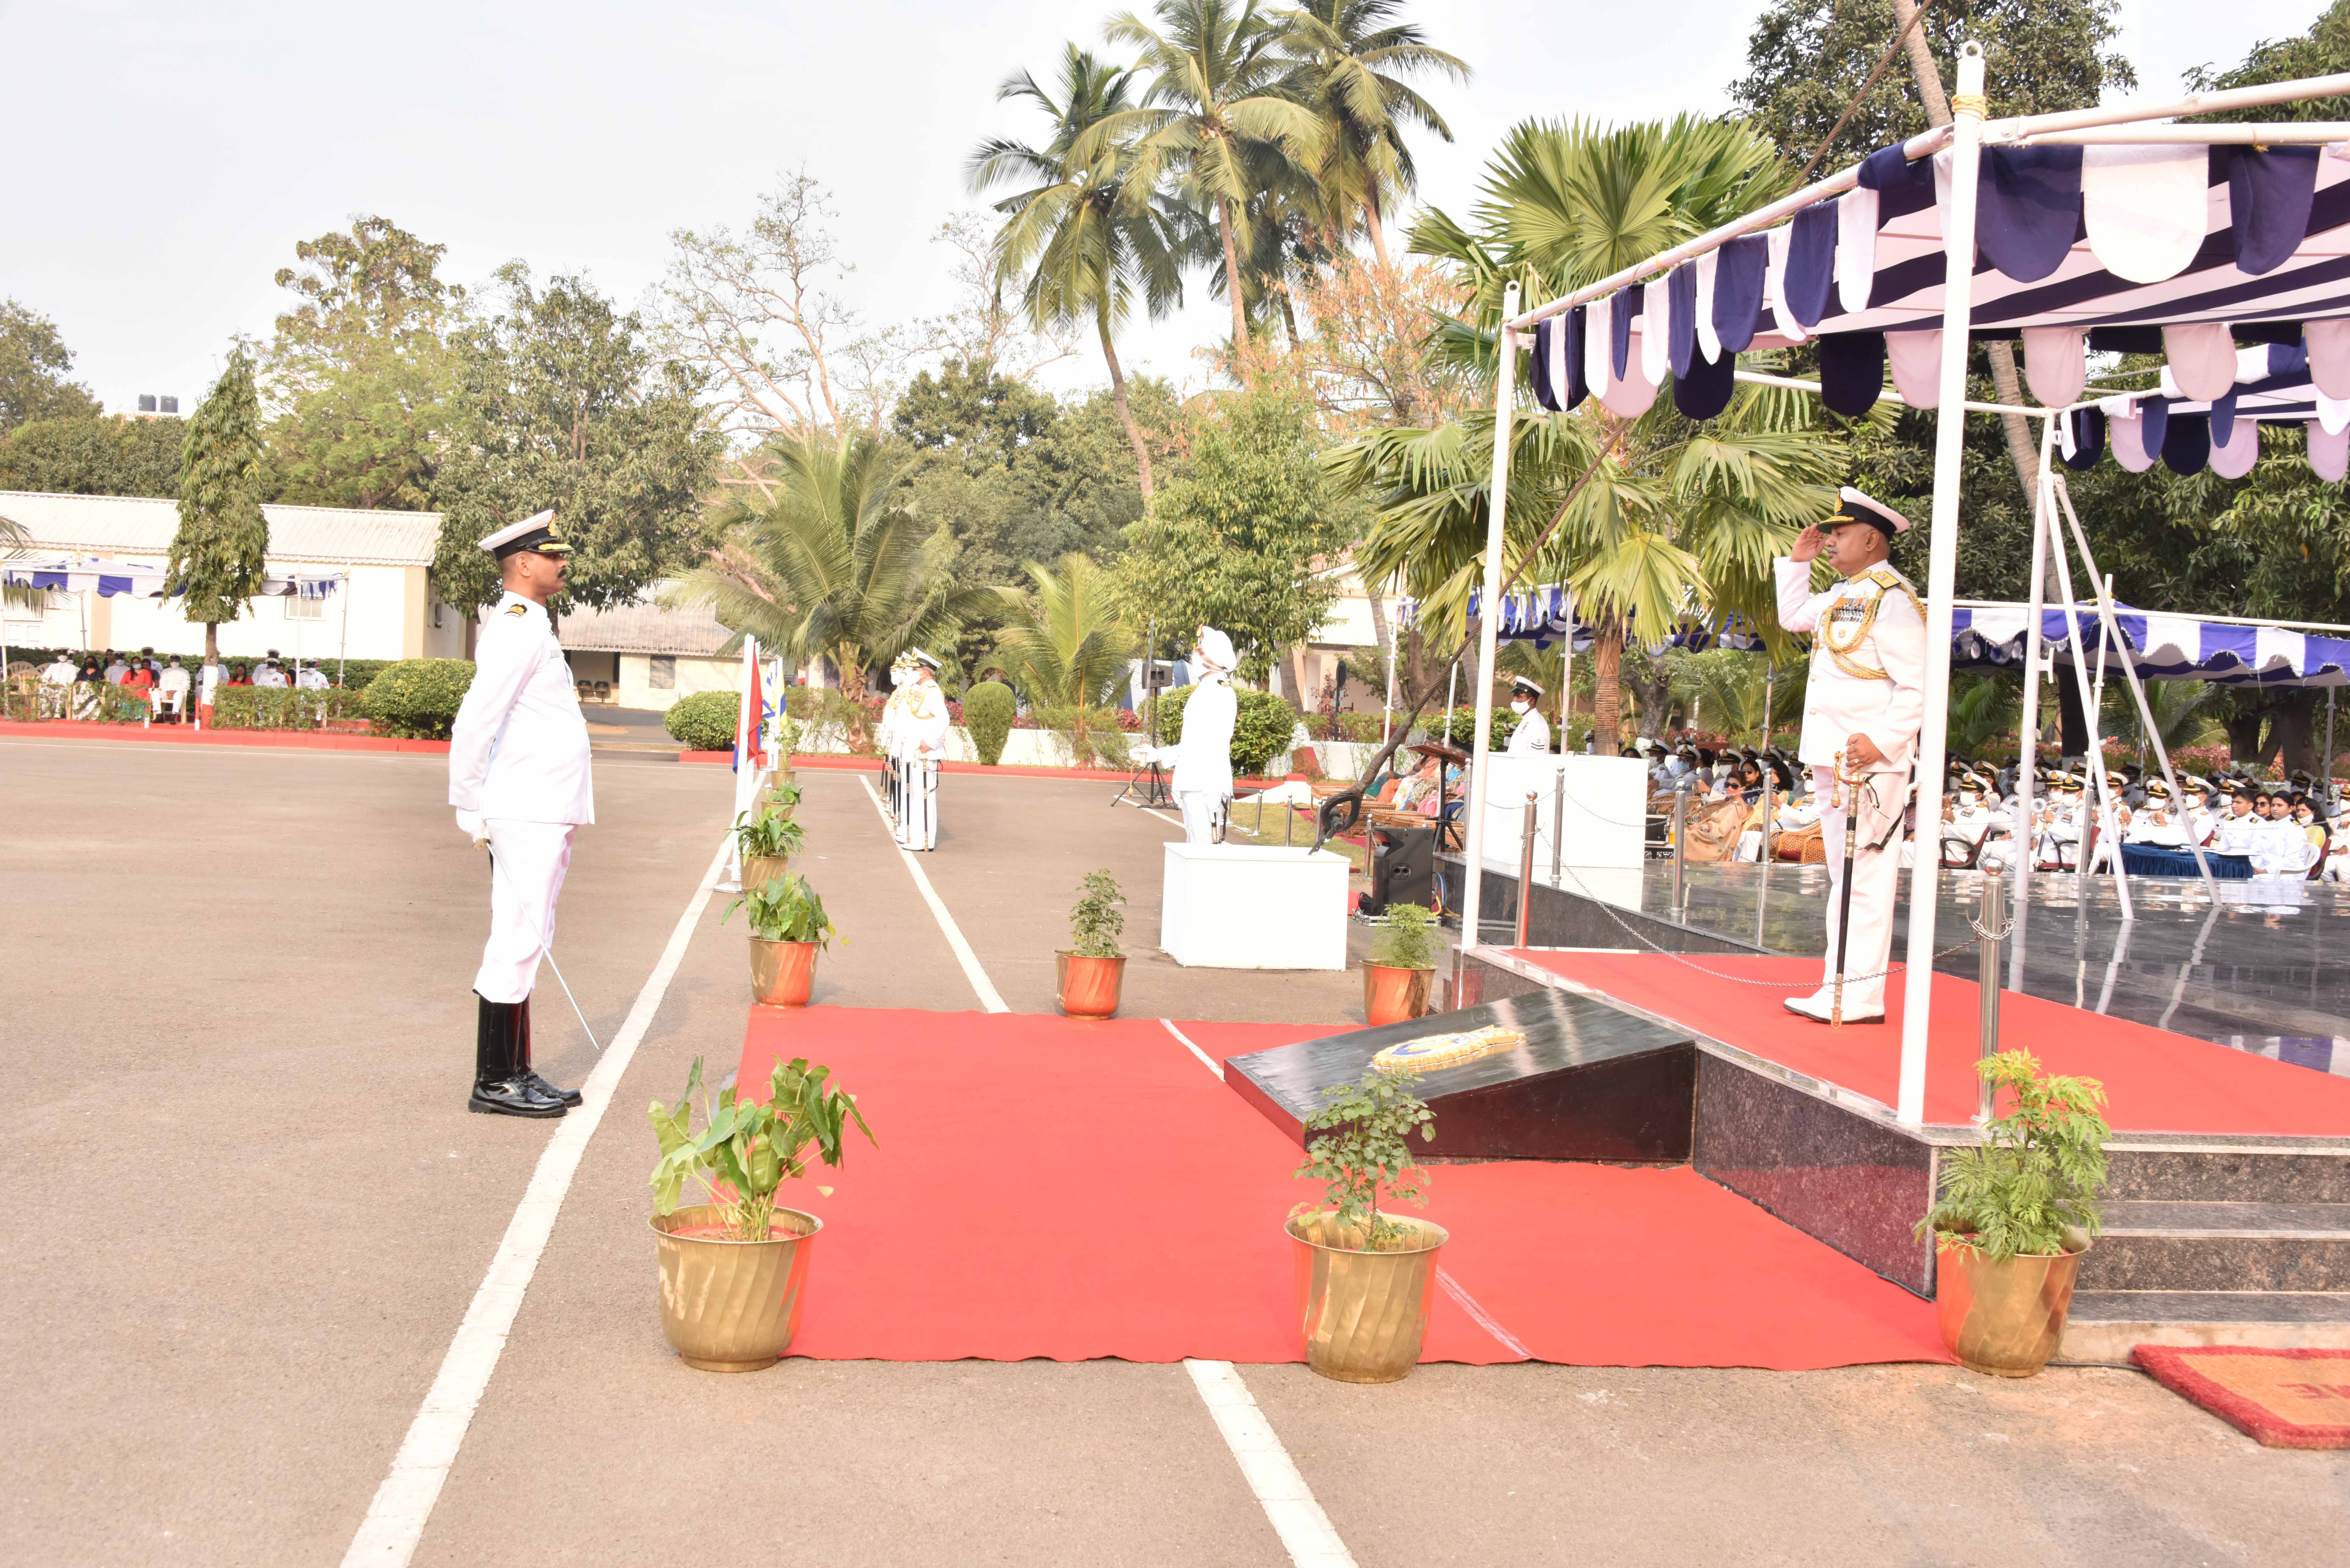 Vice Admiral Ajendra Bahadur Singh takes over as the Flag Officer Commanding-in-Chief, ENC